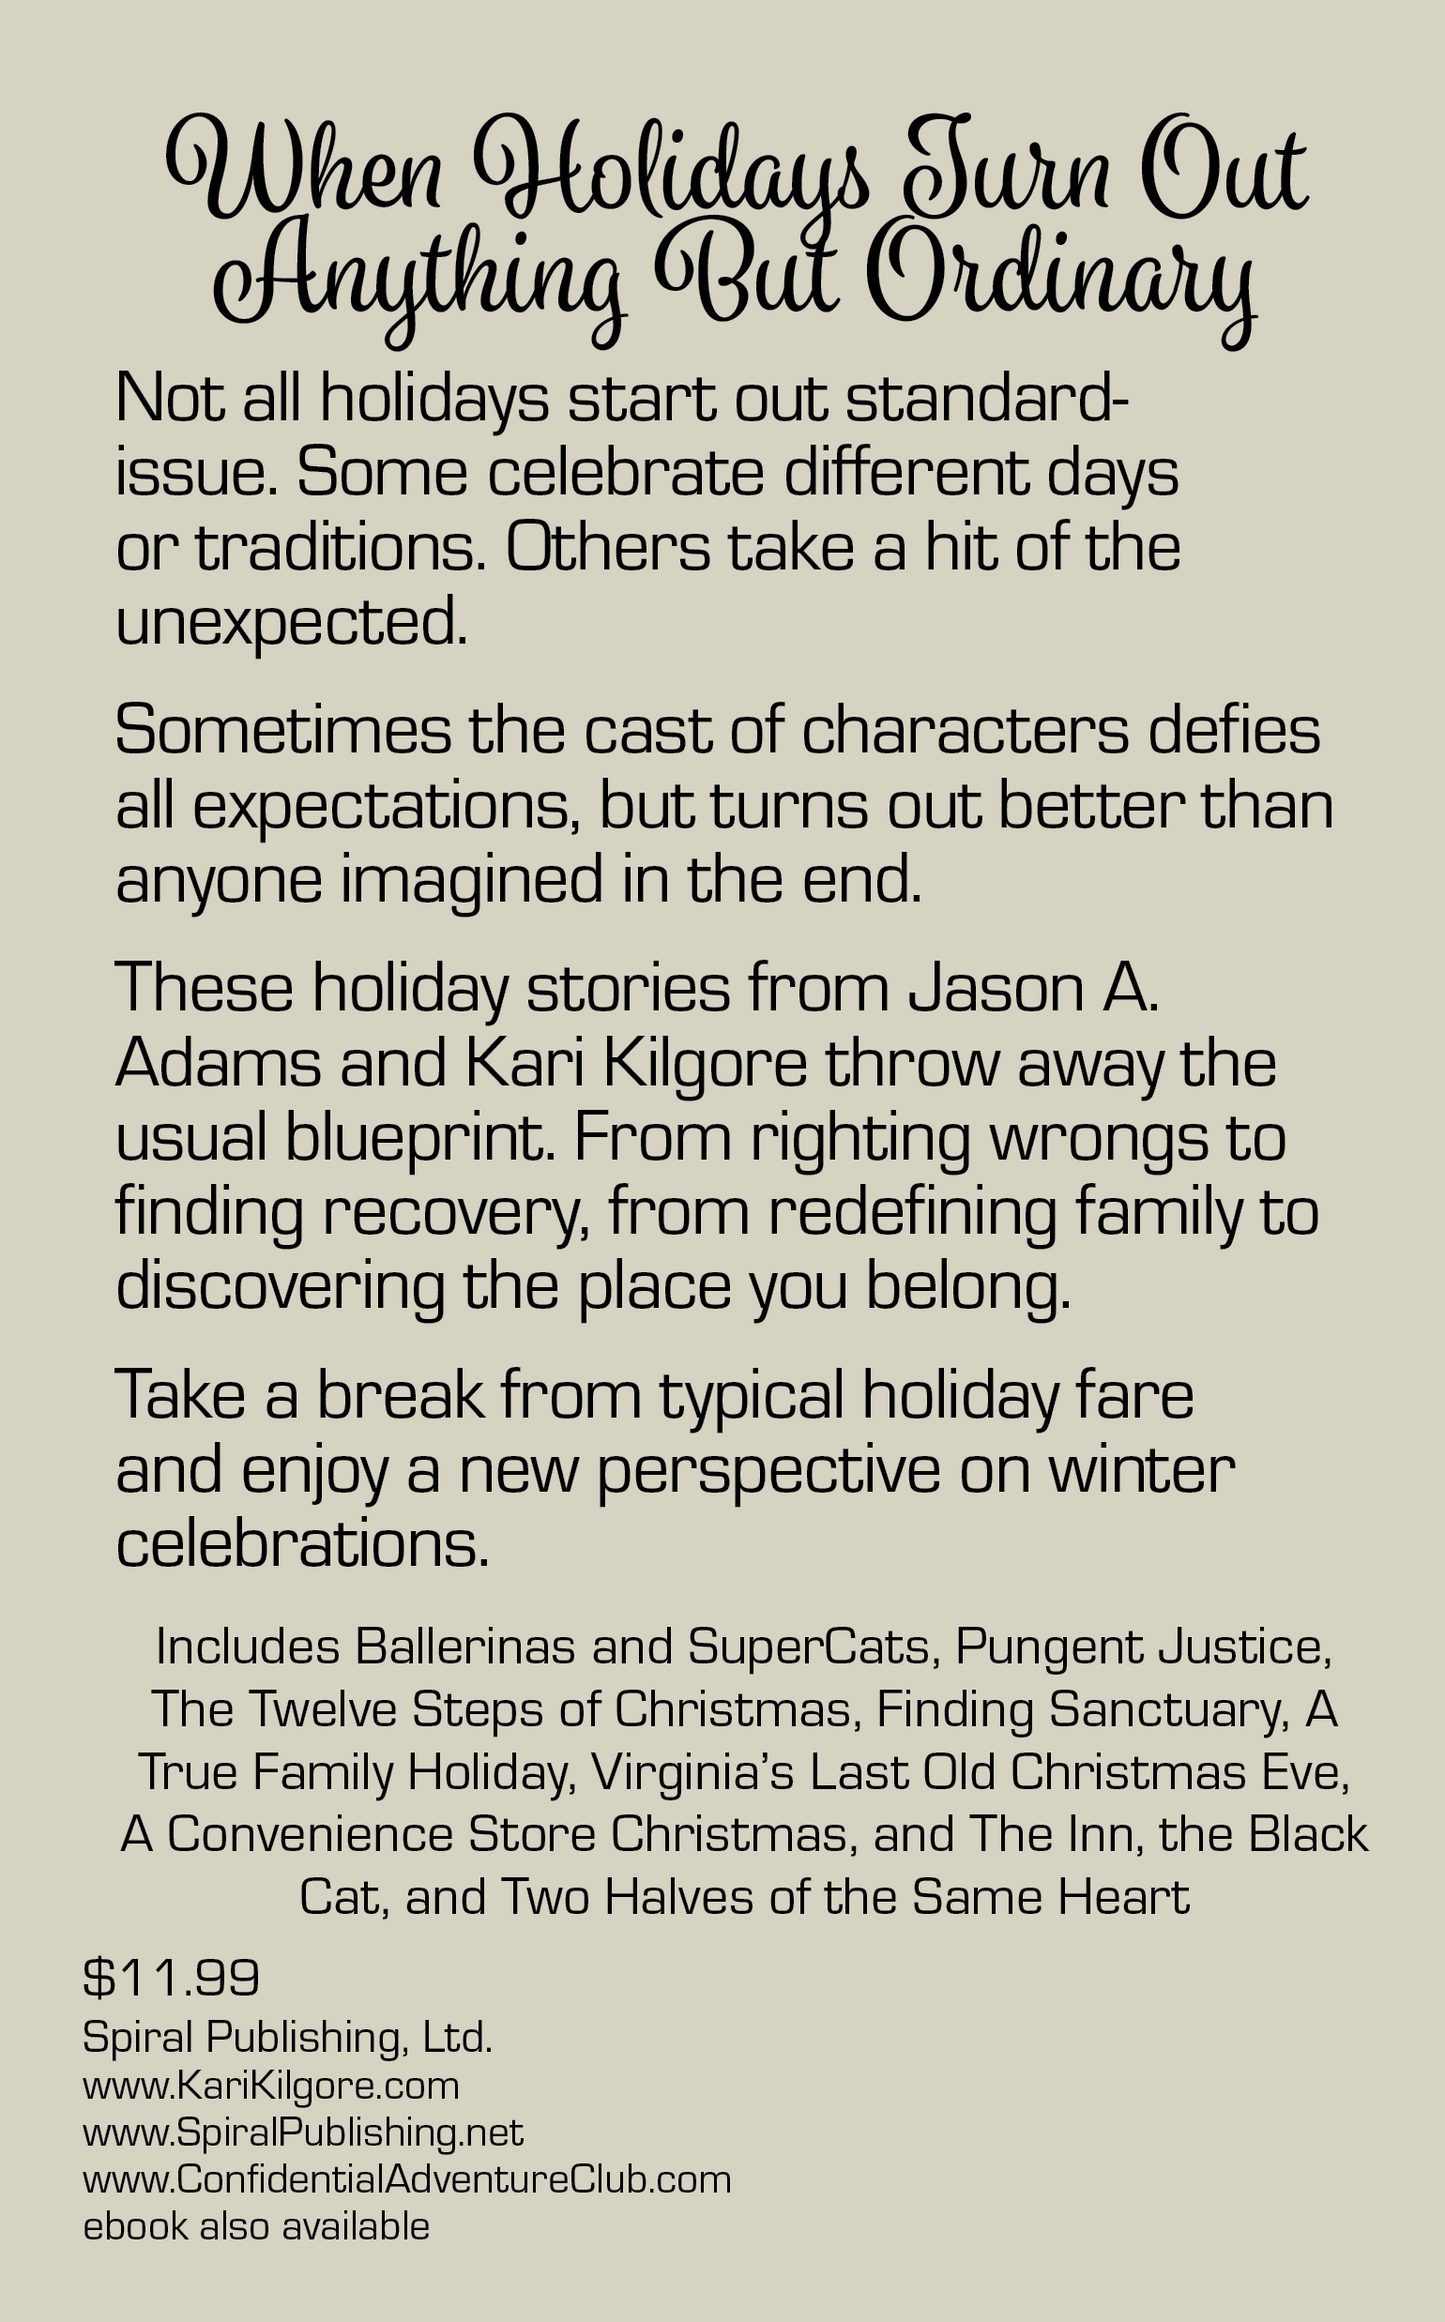 Uncommon Holidays: A Different Side of the Season